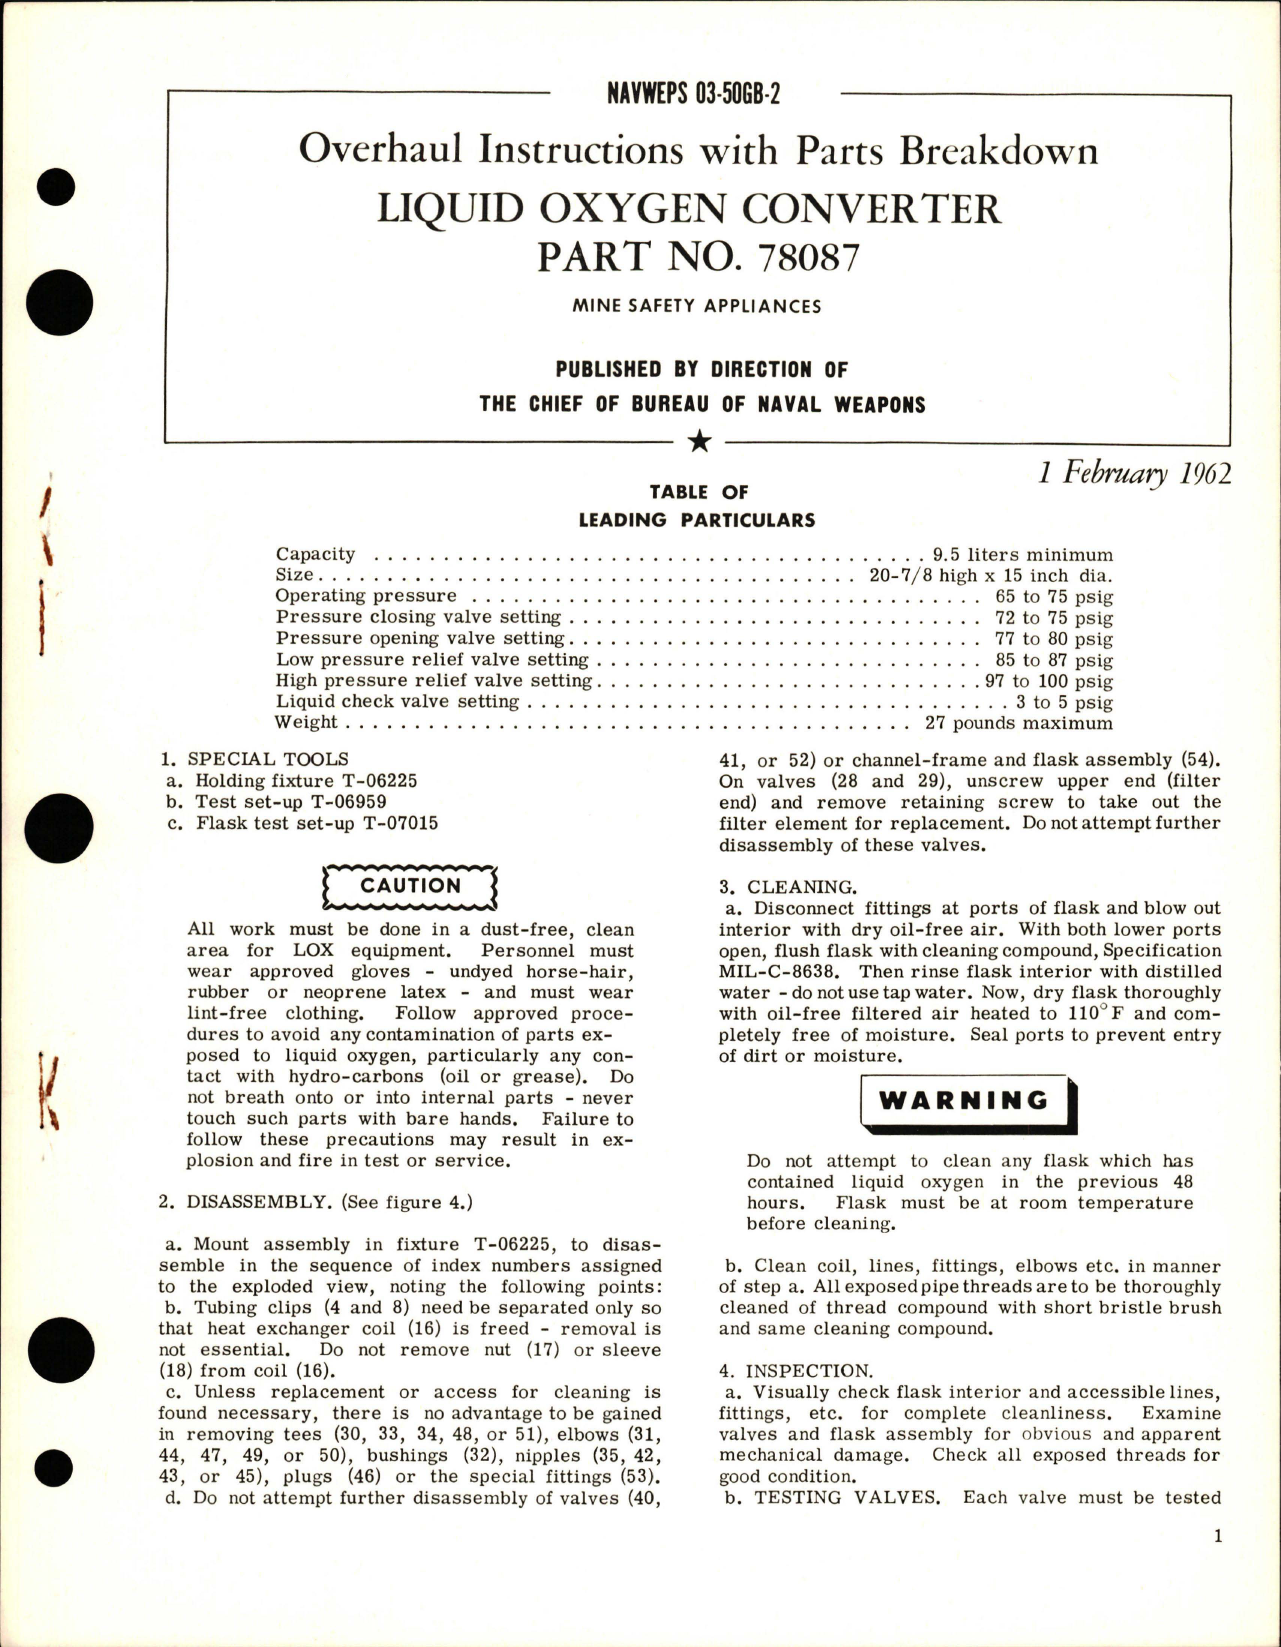 Sample page 1 from AirCorps Library document: Overhaul Instructions with Parts Breakdown for Liquid Oxygen Converter - Part 78087 